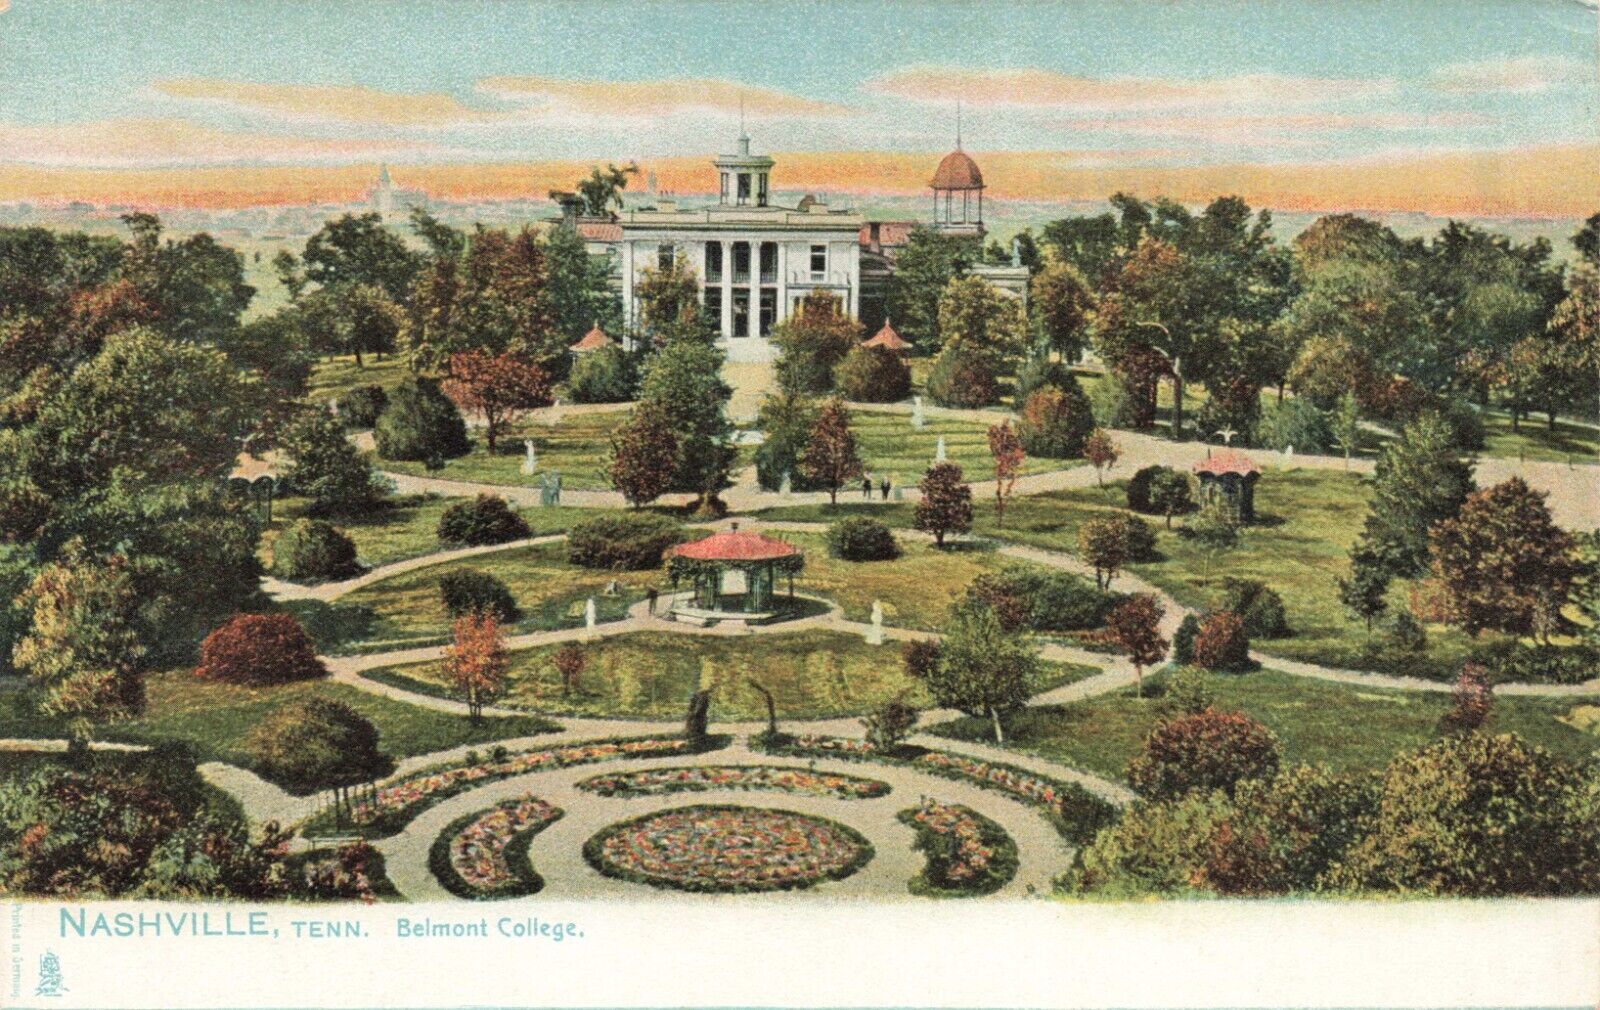 TN-Nashville, Tennessee-View of Belmont College c1910 A35